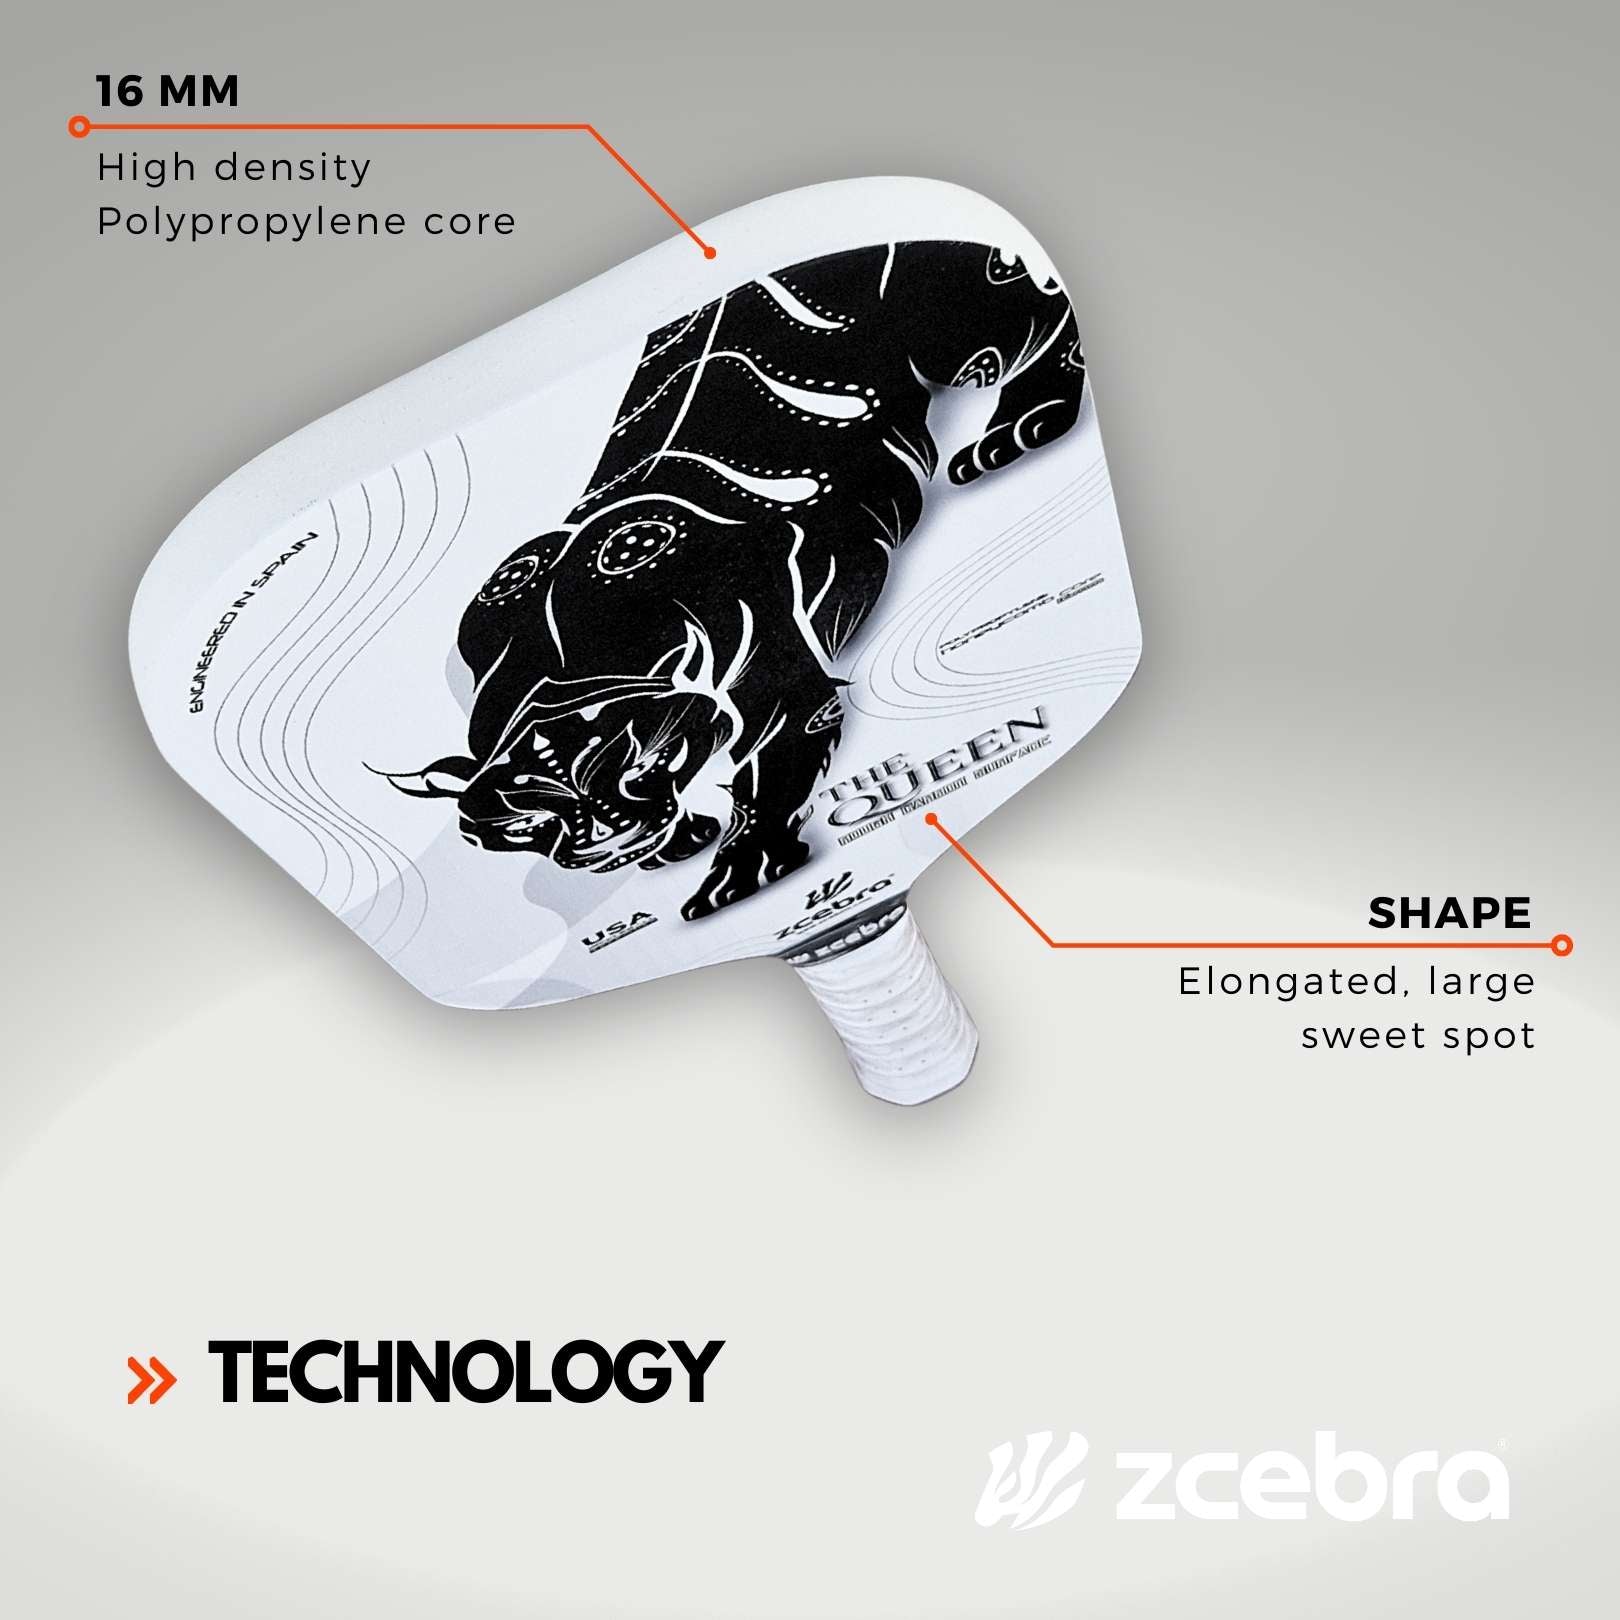 Zcebra The Queen Carbon pickleball paddle